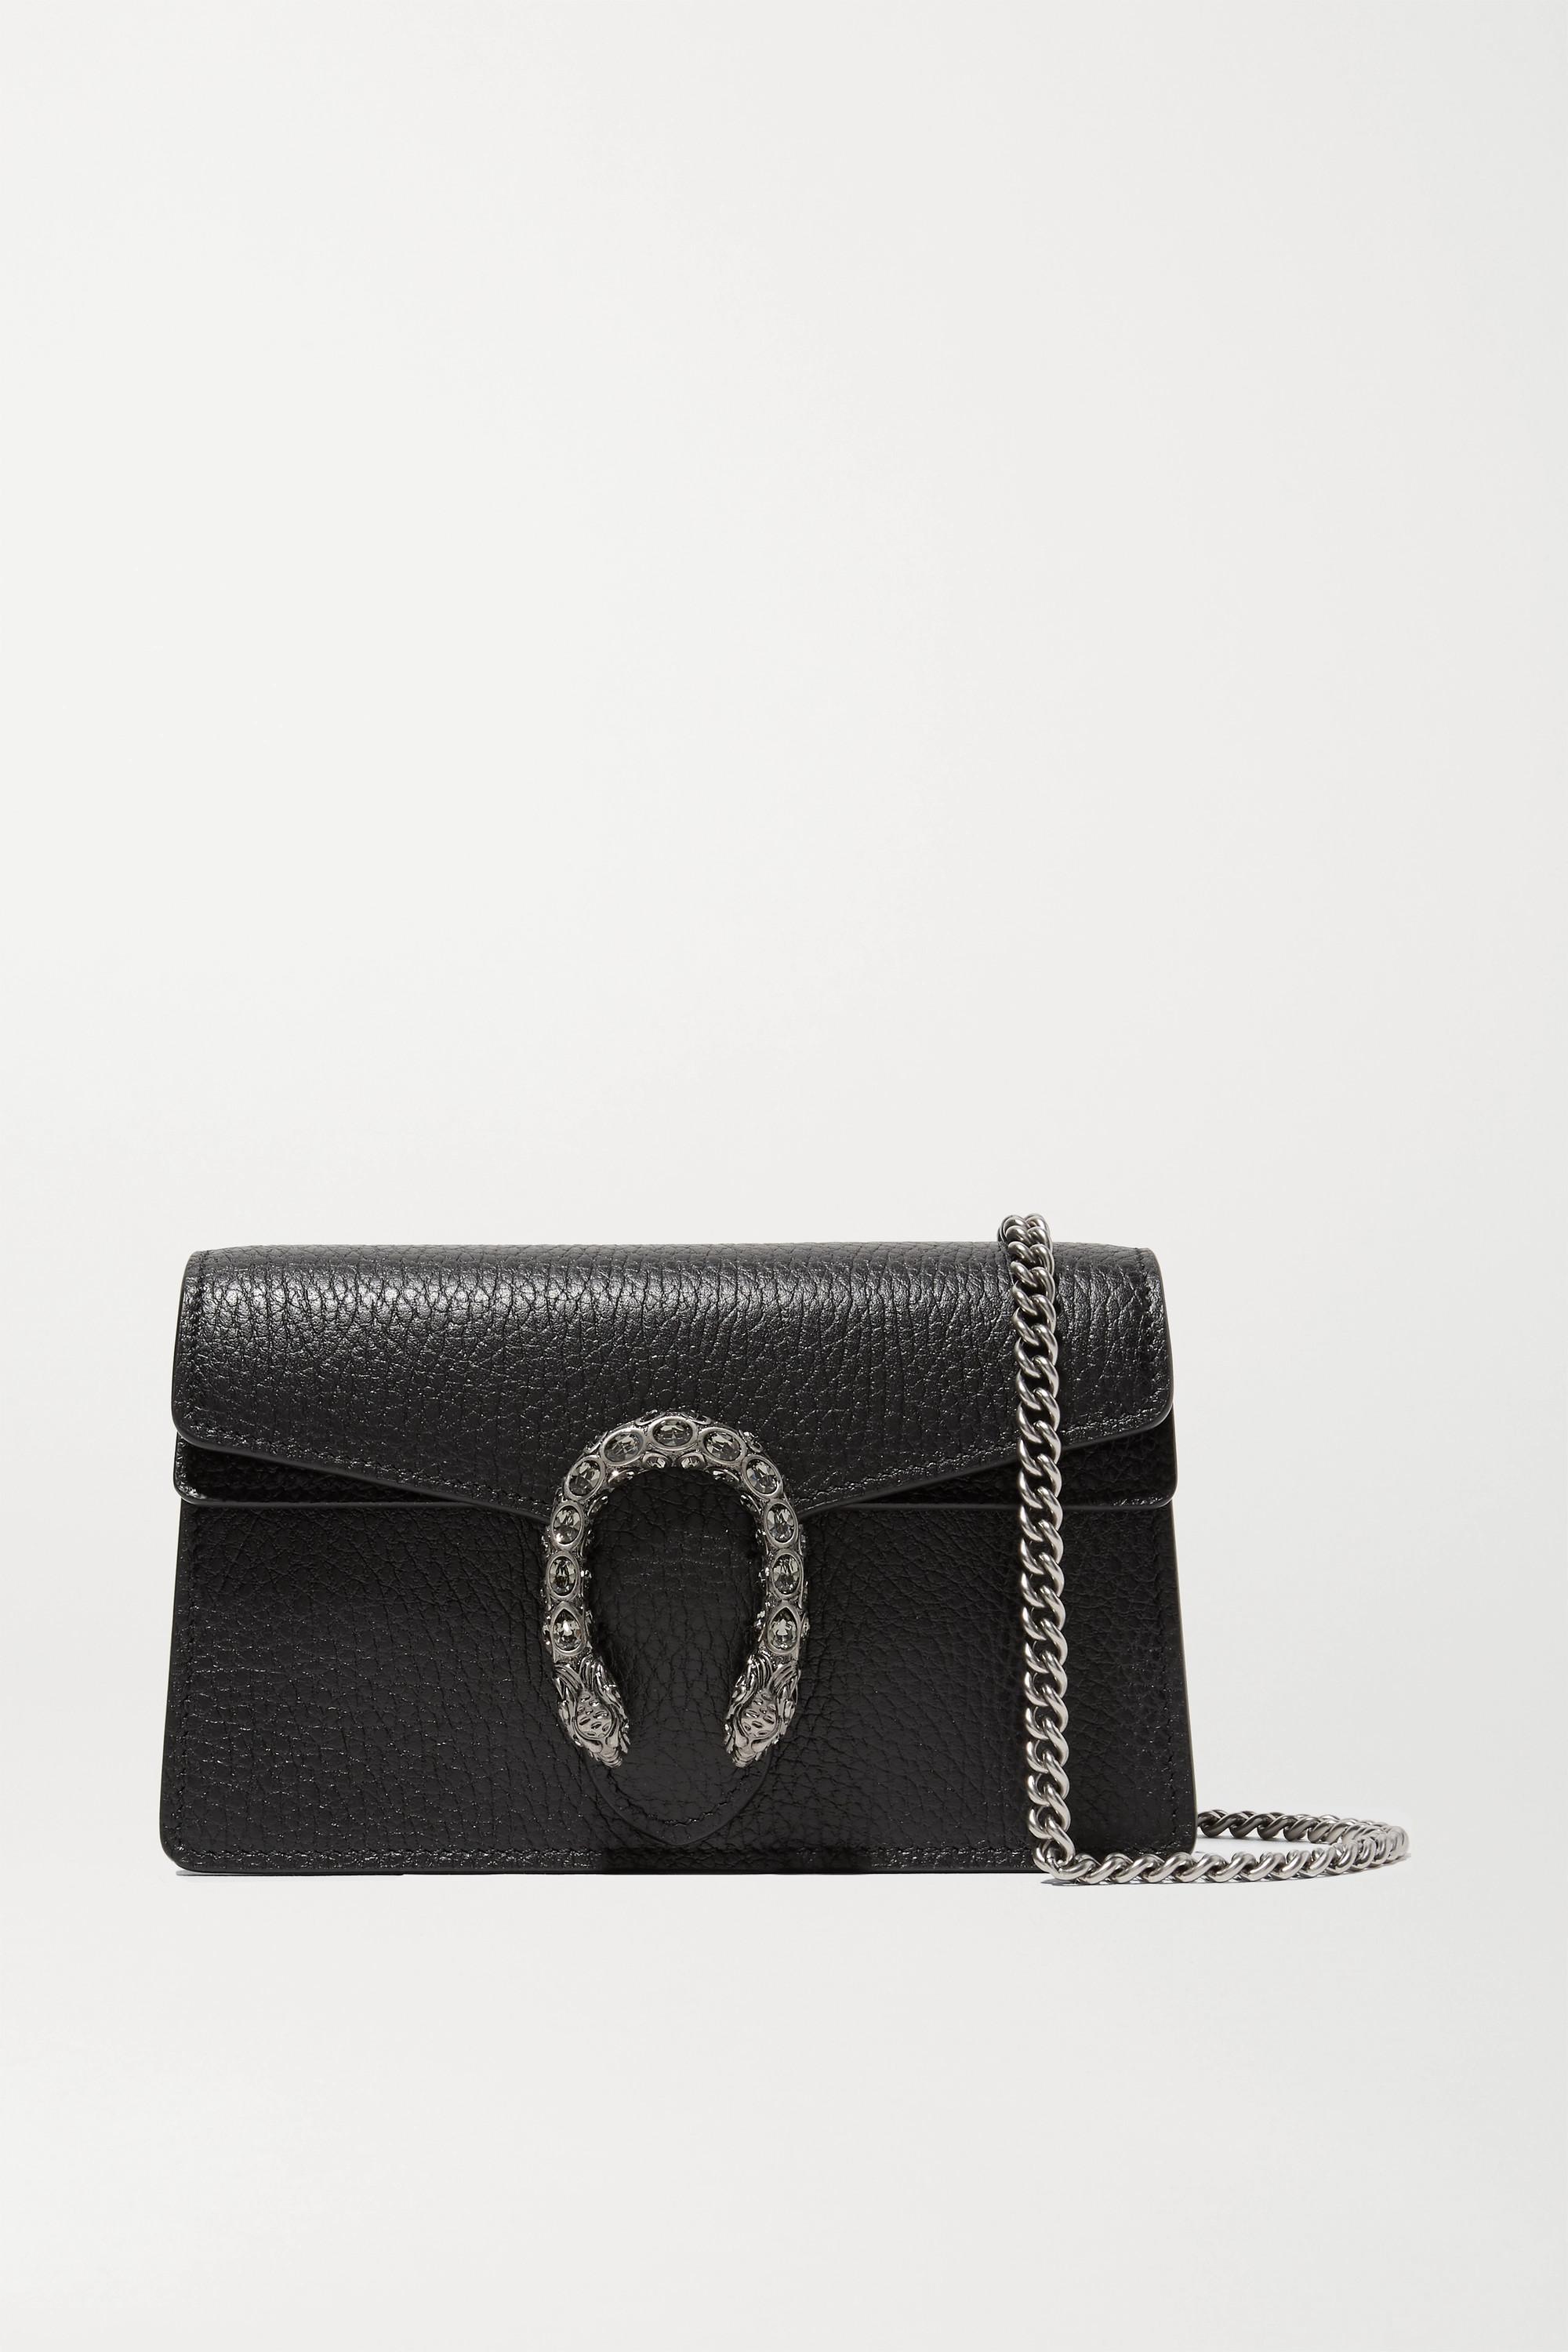 gucci dionysus black leather small